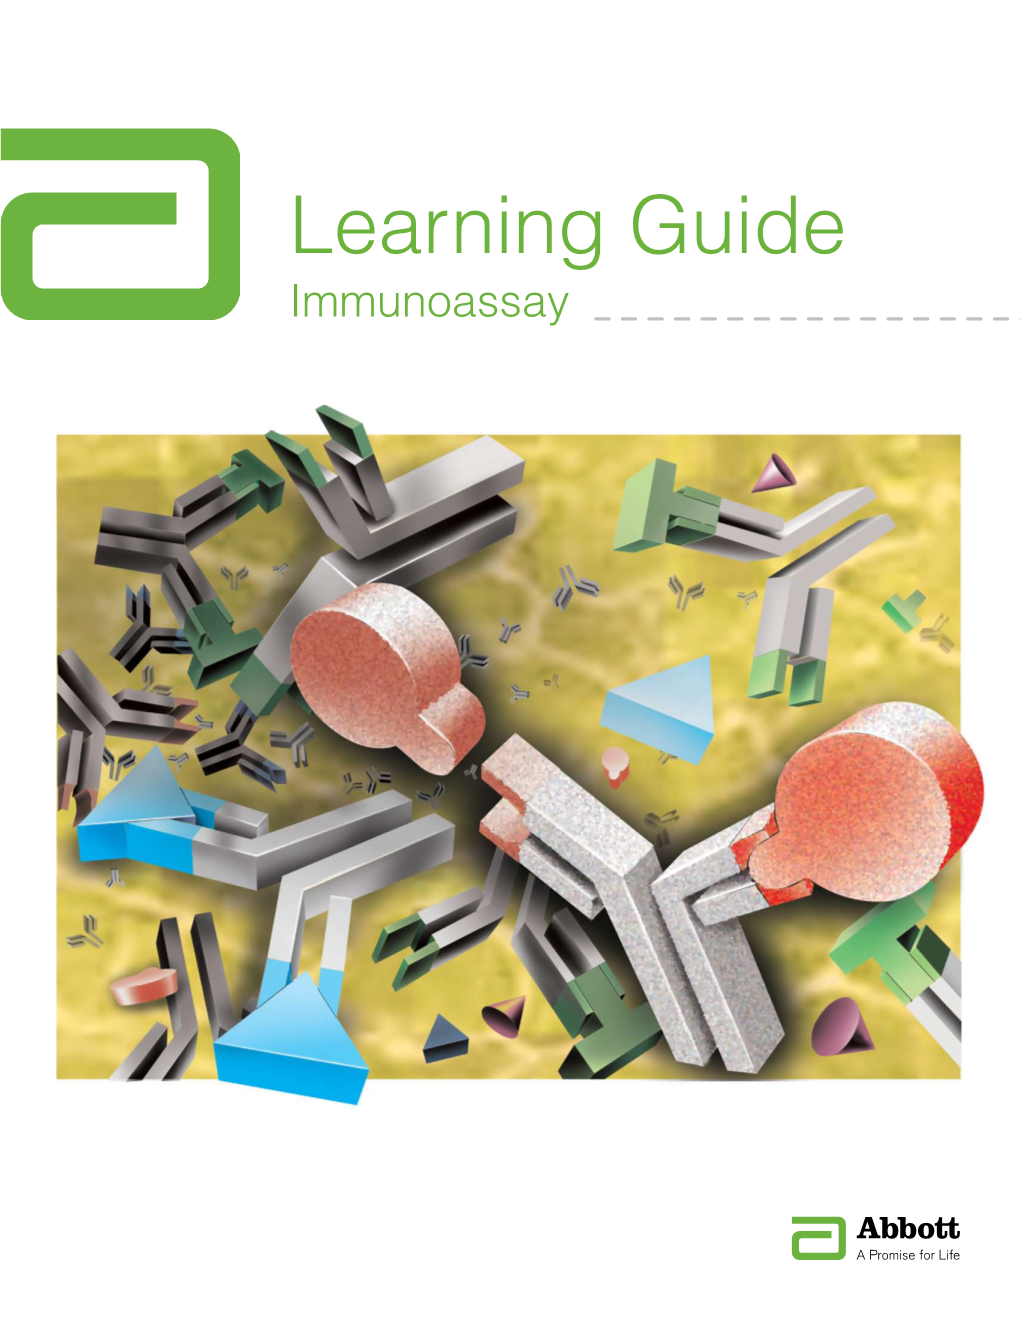 Learning Guide: Immunoassay: Introduction to Immunoassays 5 Immunoassay: Antibodies, Antigens and Analytes Defined